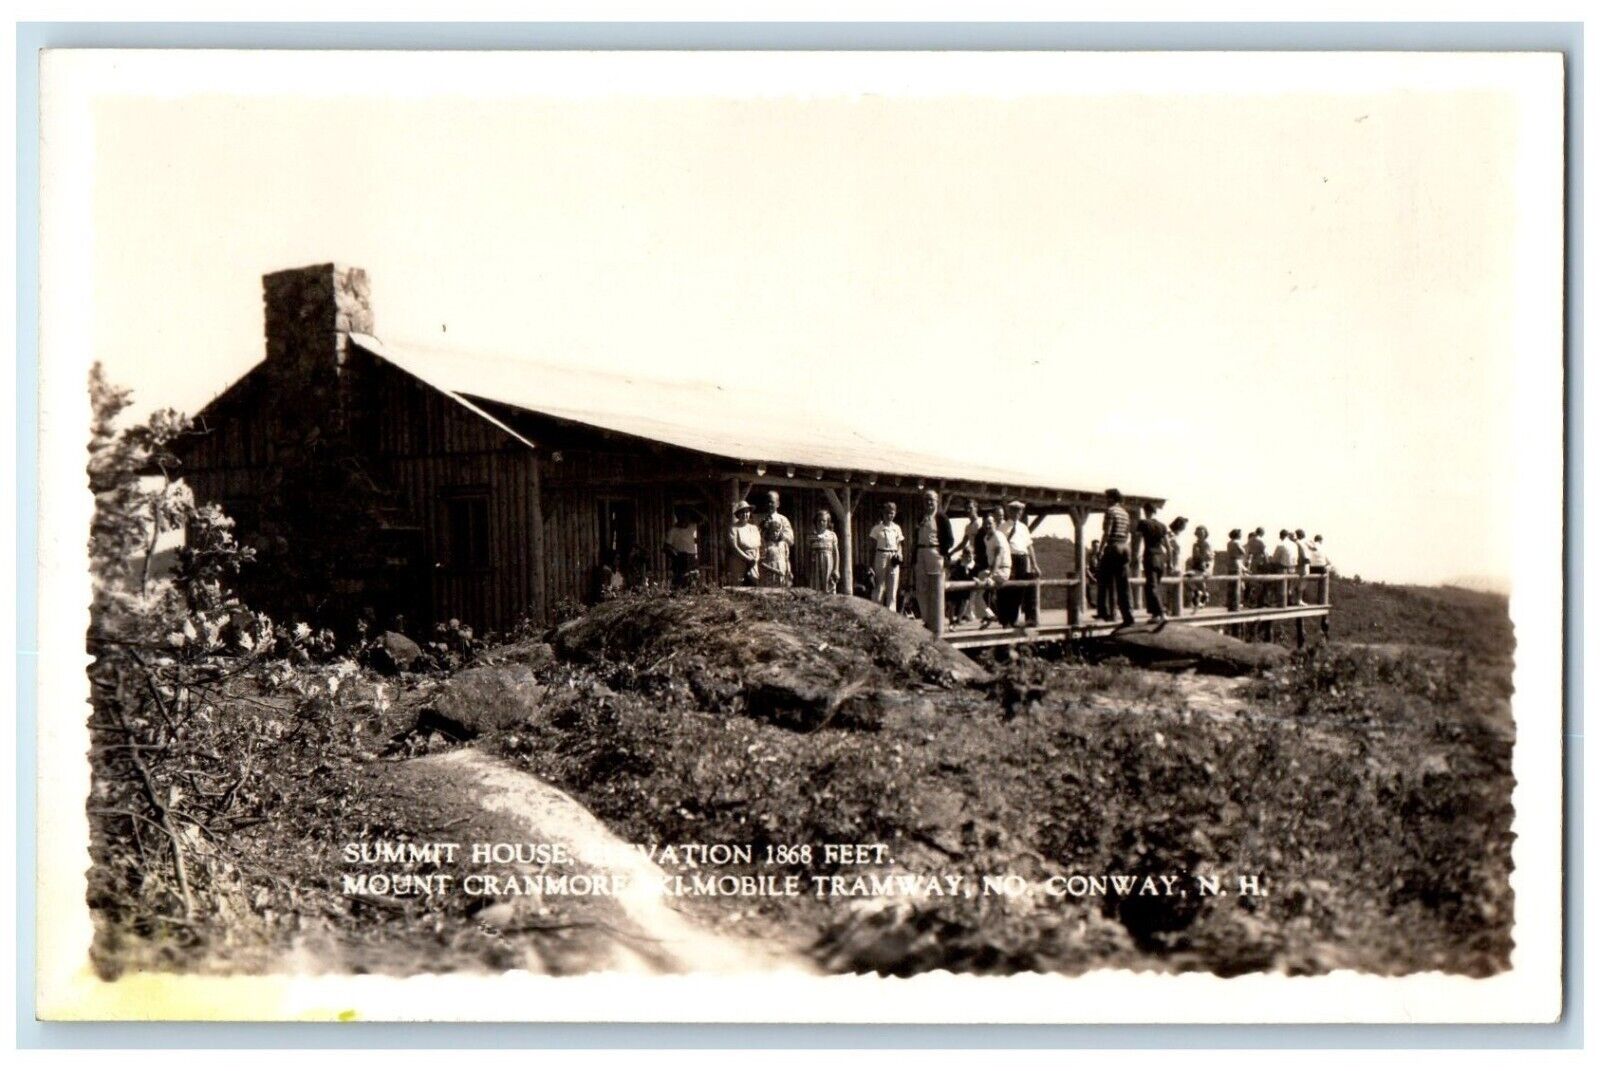 Summit House Mount Cranmore Mobile Tramway No. Conway NH RPPC Photo Postcard